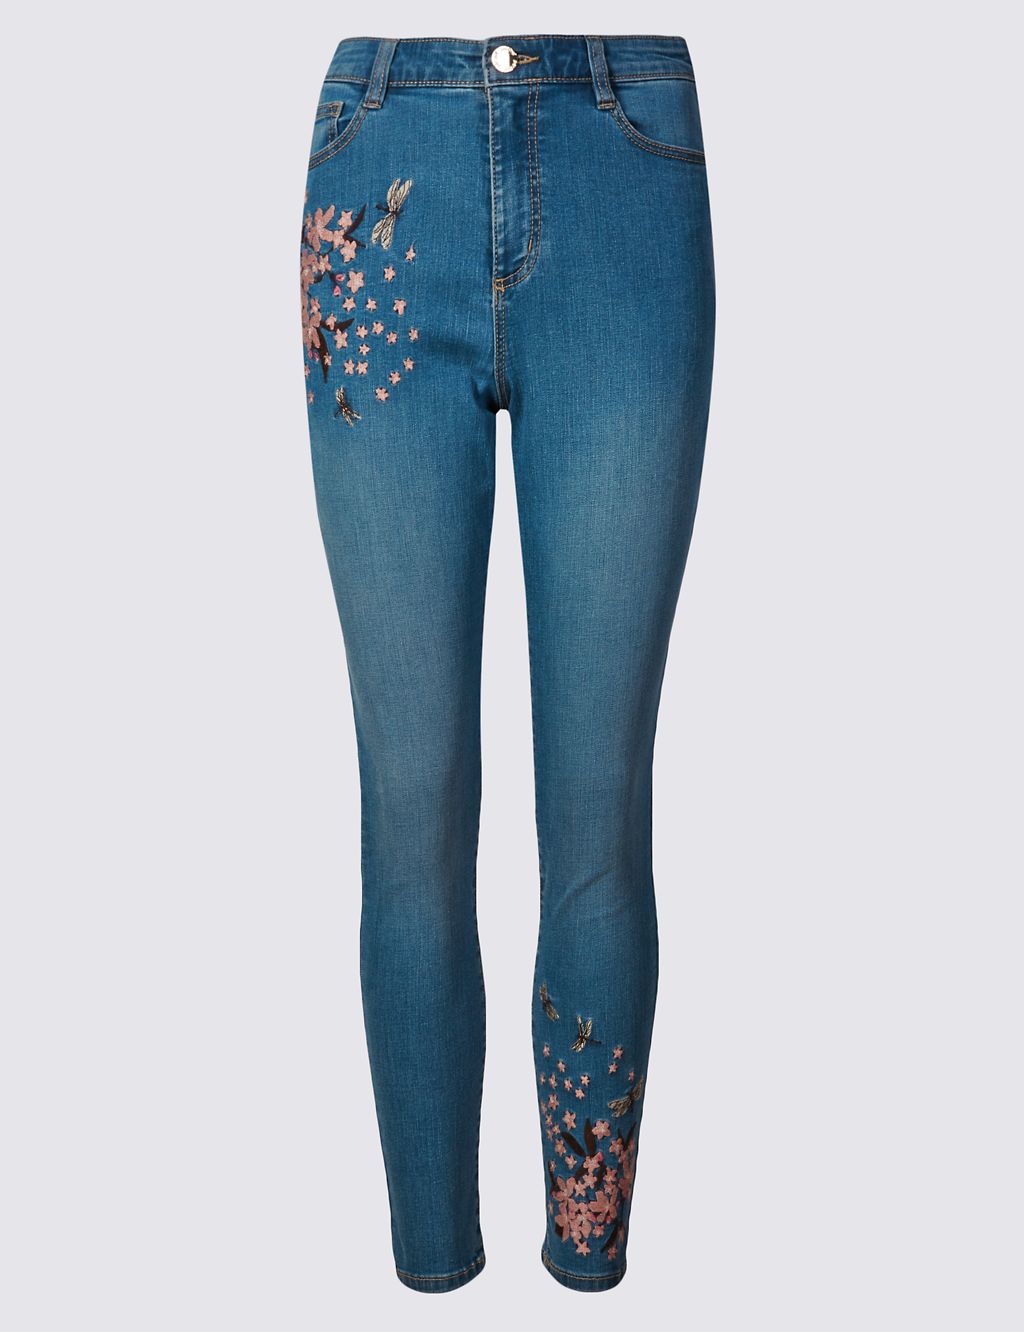 Embroidered Roma Rise Skinny Leg Jeans 1 of 6